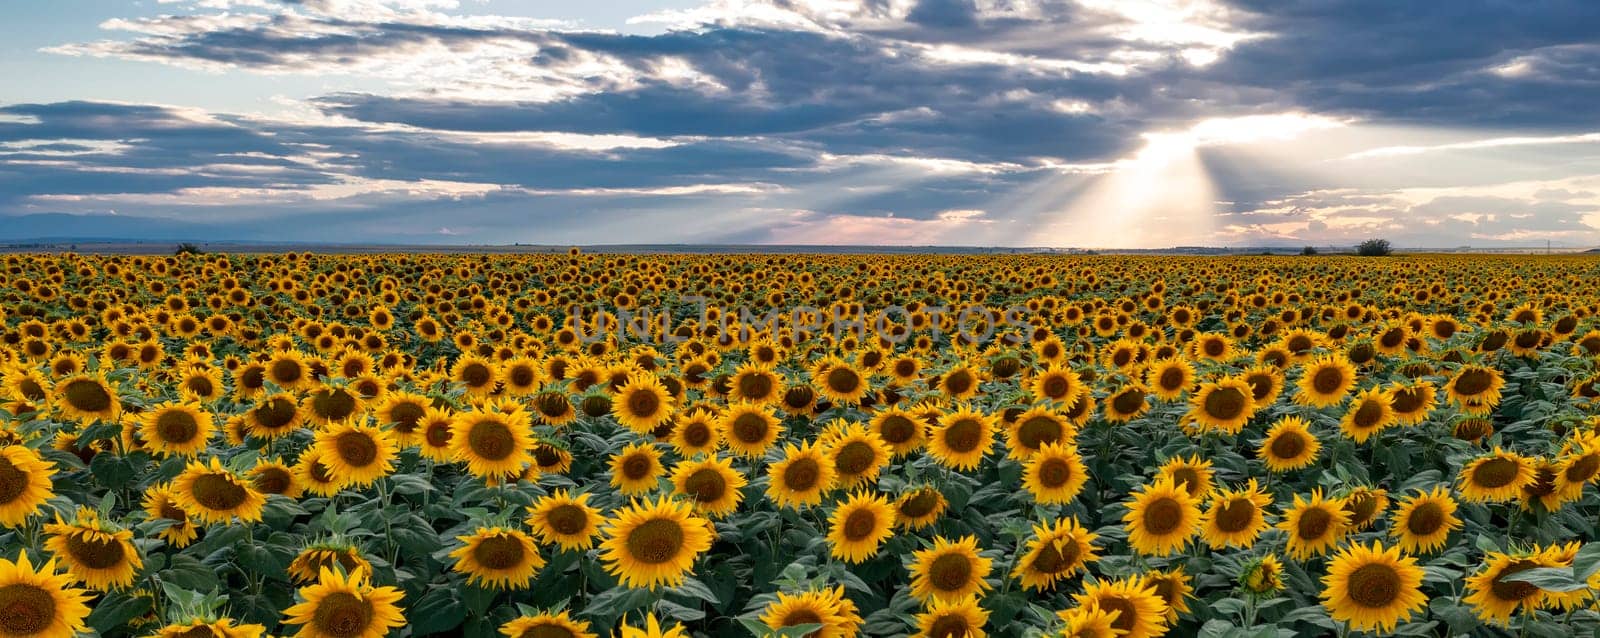 Panoramic view of field with sunflower flowers against the sunset sky. by EdVal